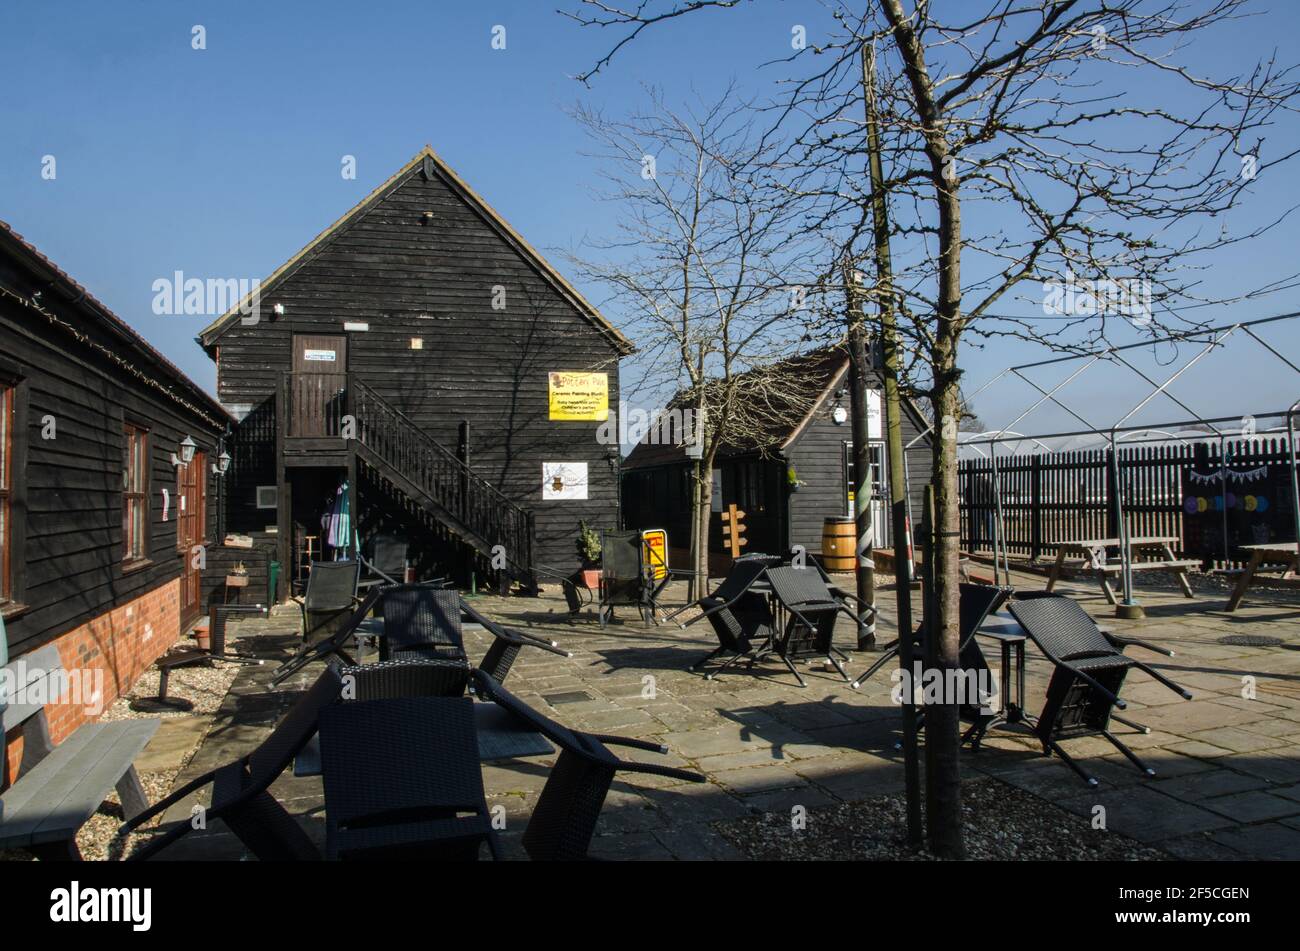 Wokingham, UK - February 28, 2021:  Tables and chairs in the sunshine of the Holme Grange Craft Village in Wokingham, Berkshire.  The former farm buil Stock Photo